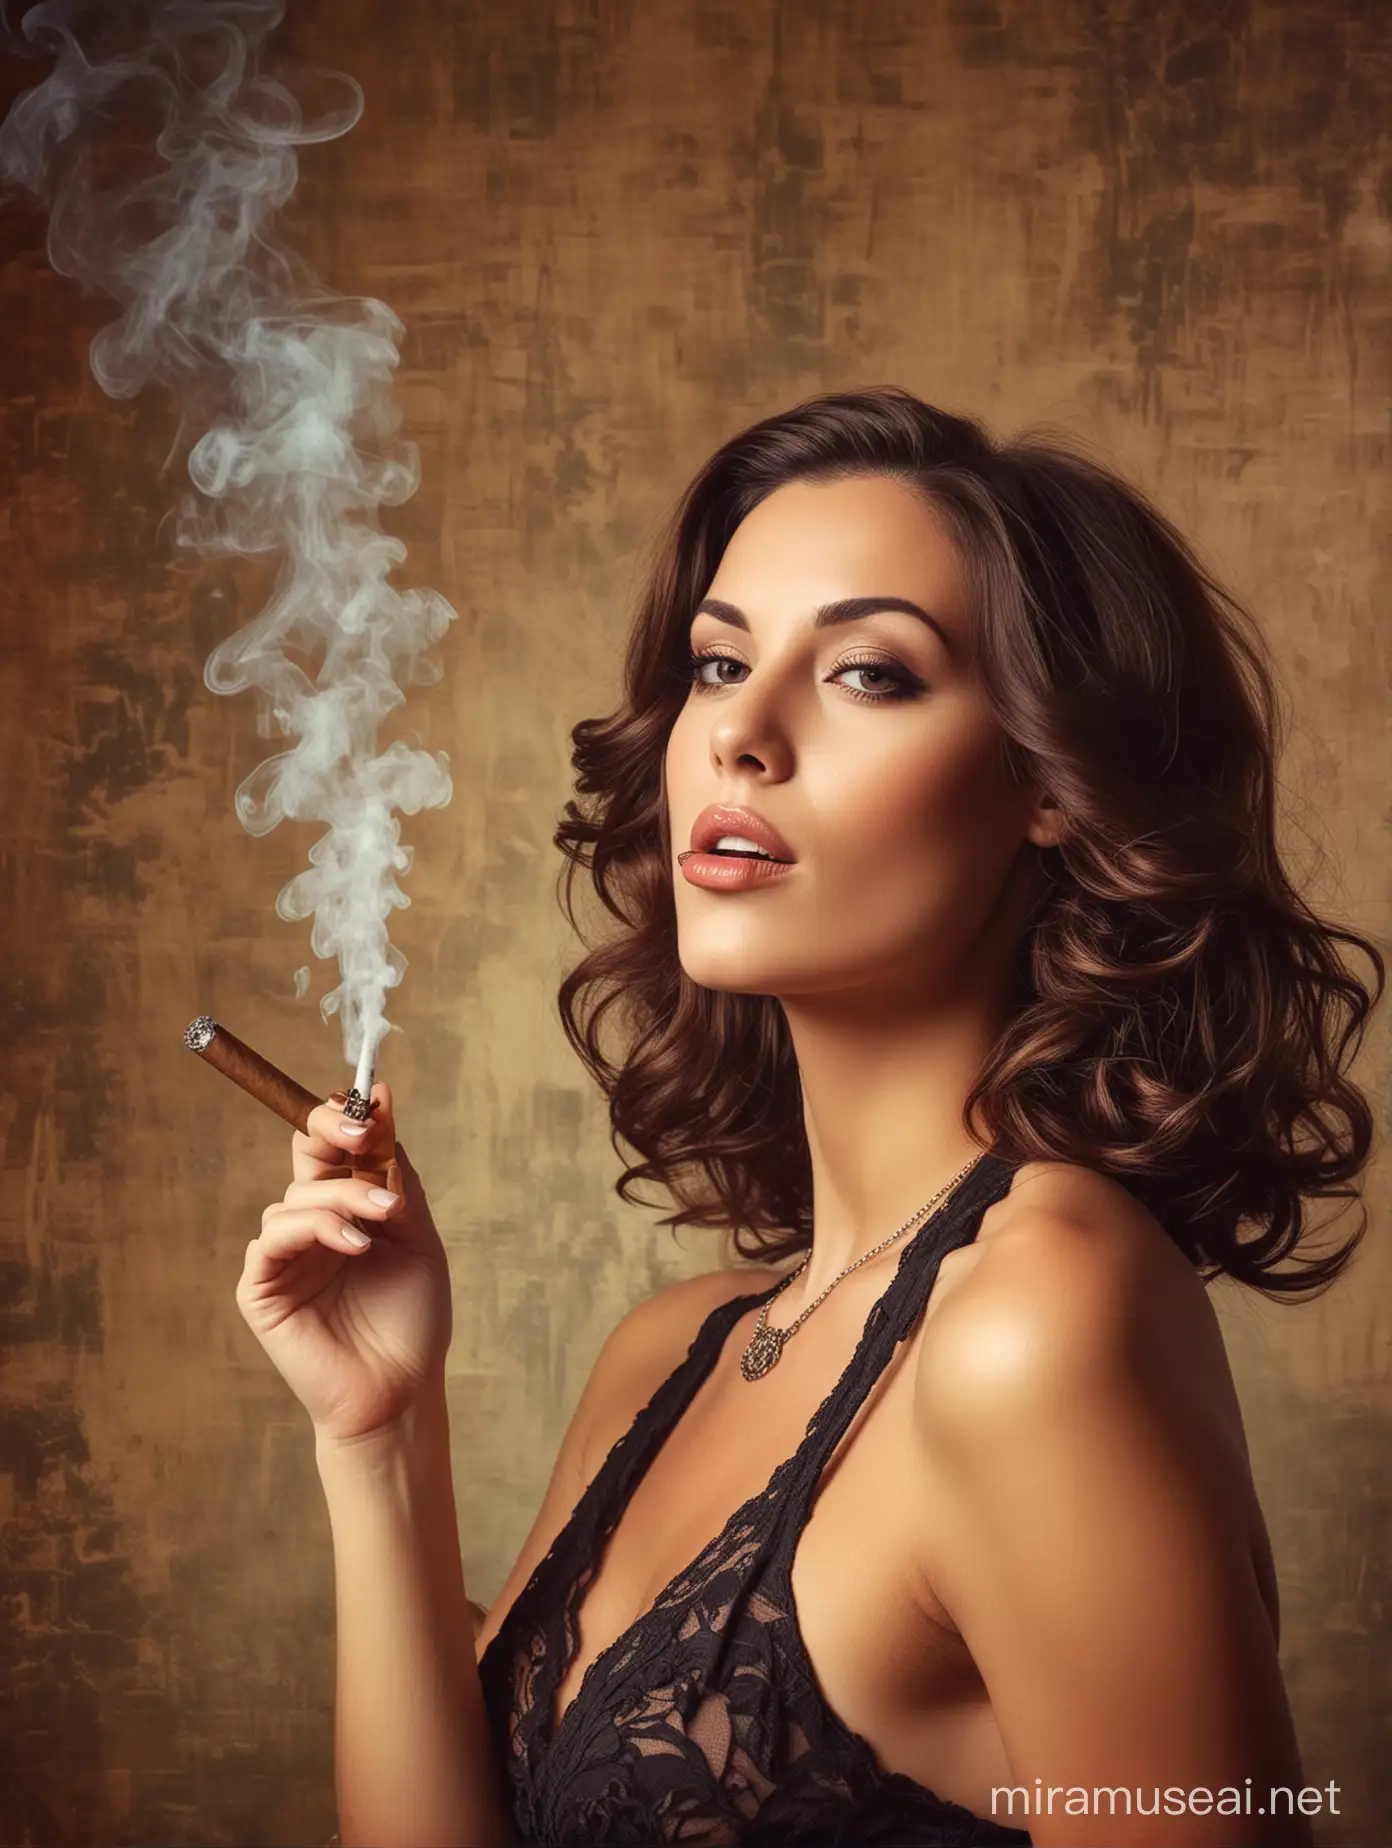 sexy women smoking cigars with vintage background
